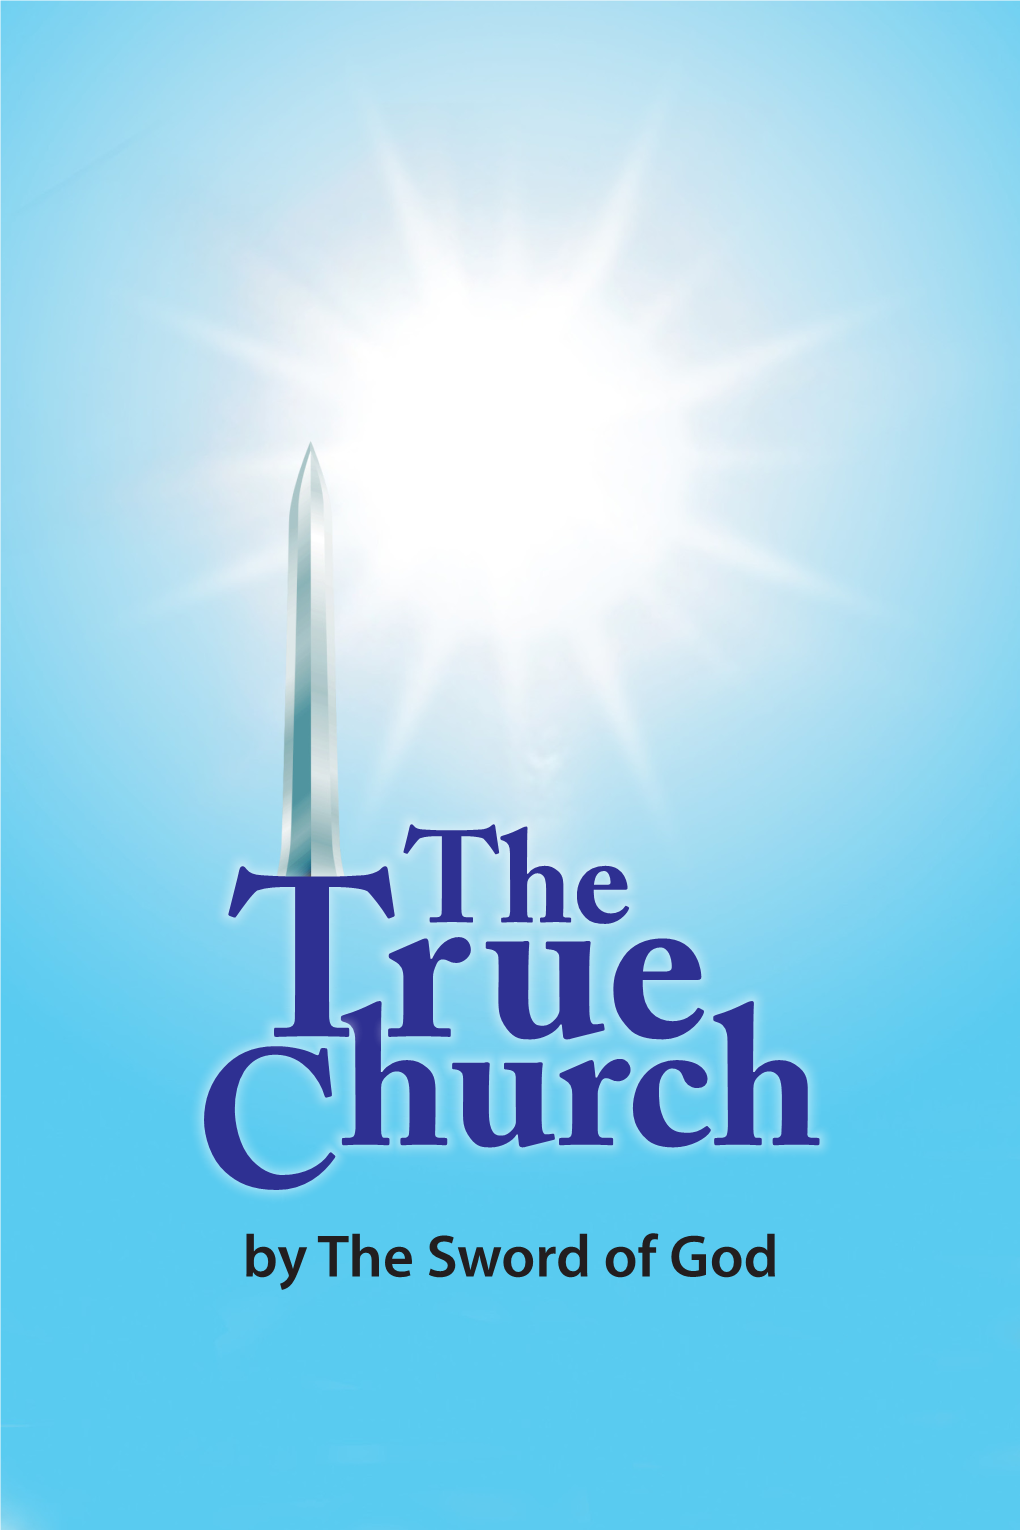 By the Sword of God by the Sword of God